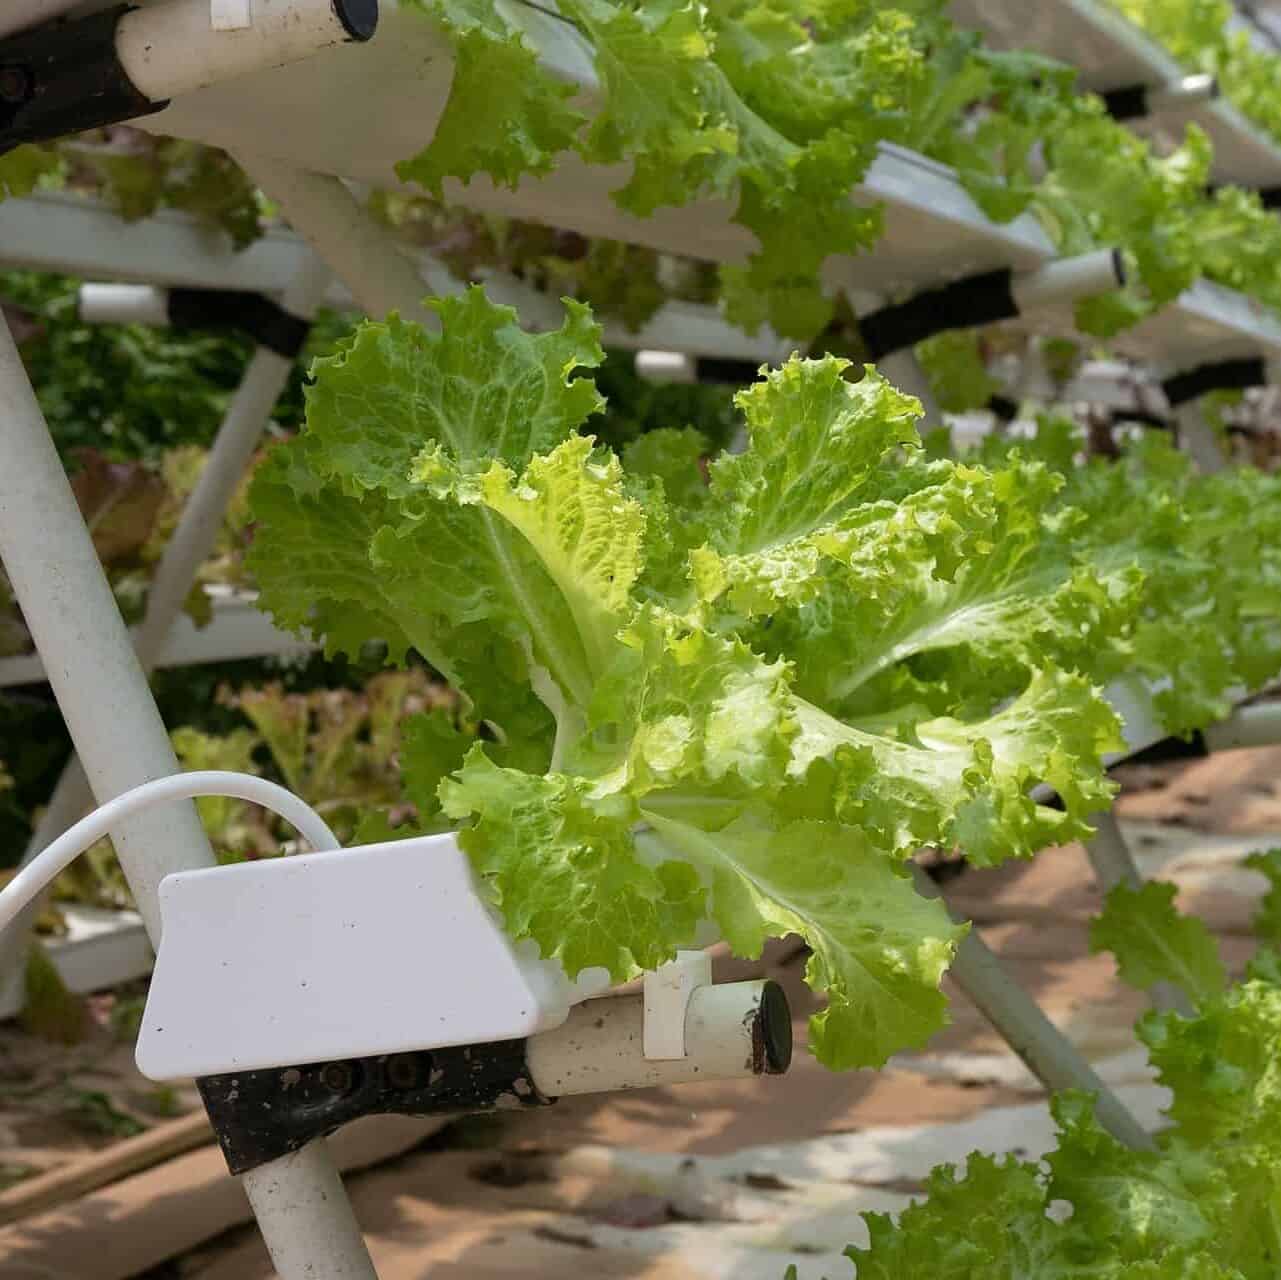 An image depicting rows of hydroponic grow beds. They are rows of plastic rails with lettuce sprouting from them.